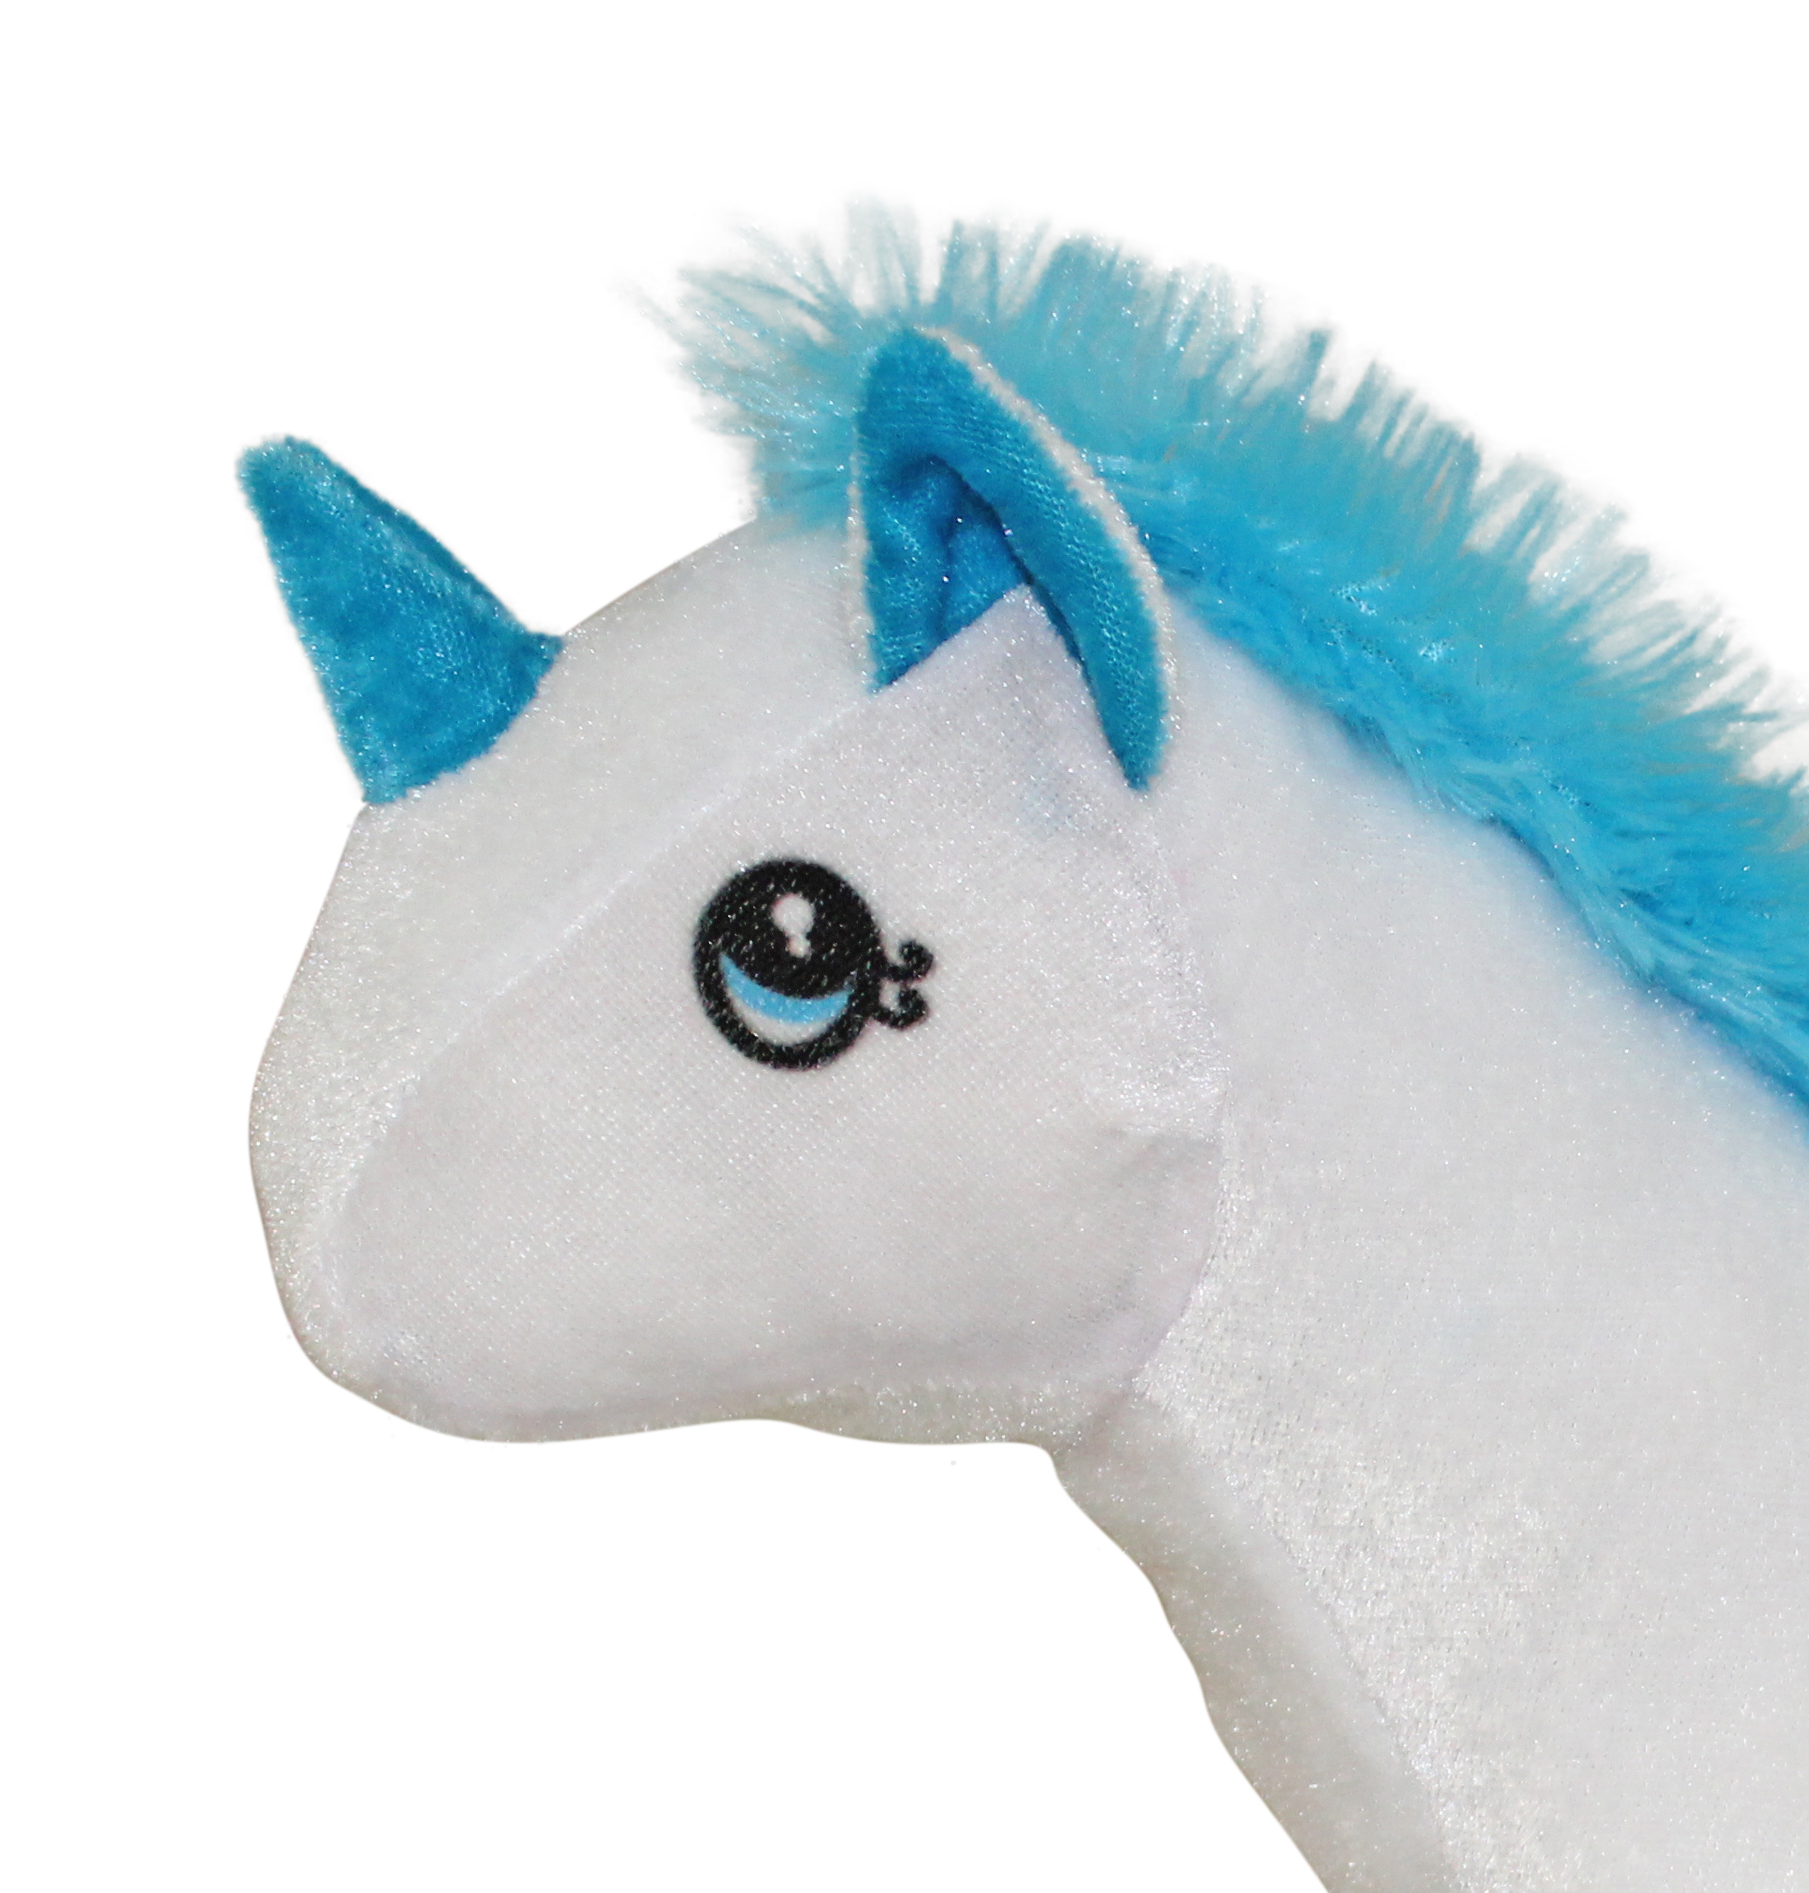 Plush Pal 12" Soft & Fluffy Blue Unicorn Stuffed Animal Toy with Blue Teal Tail And Mane - image 4 of 6